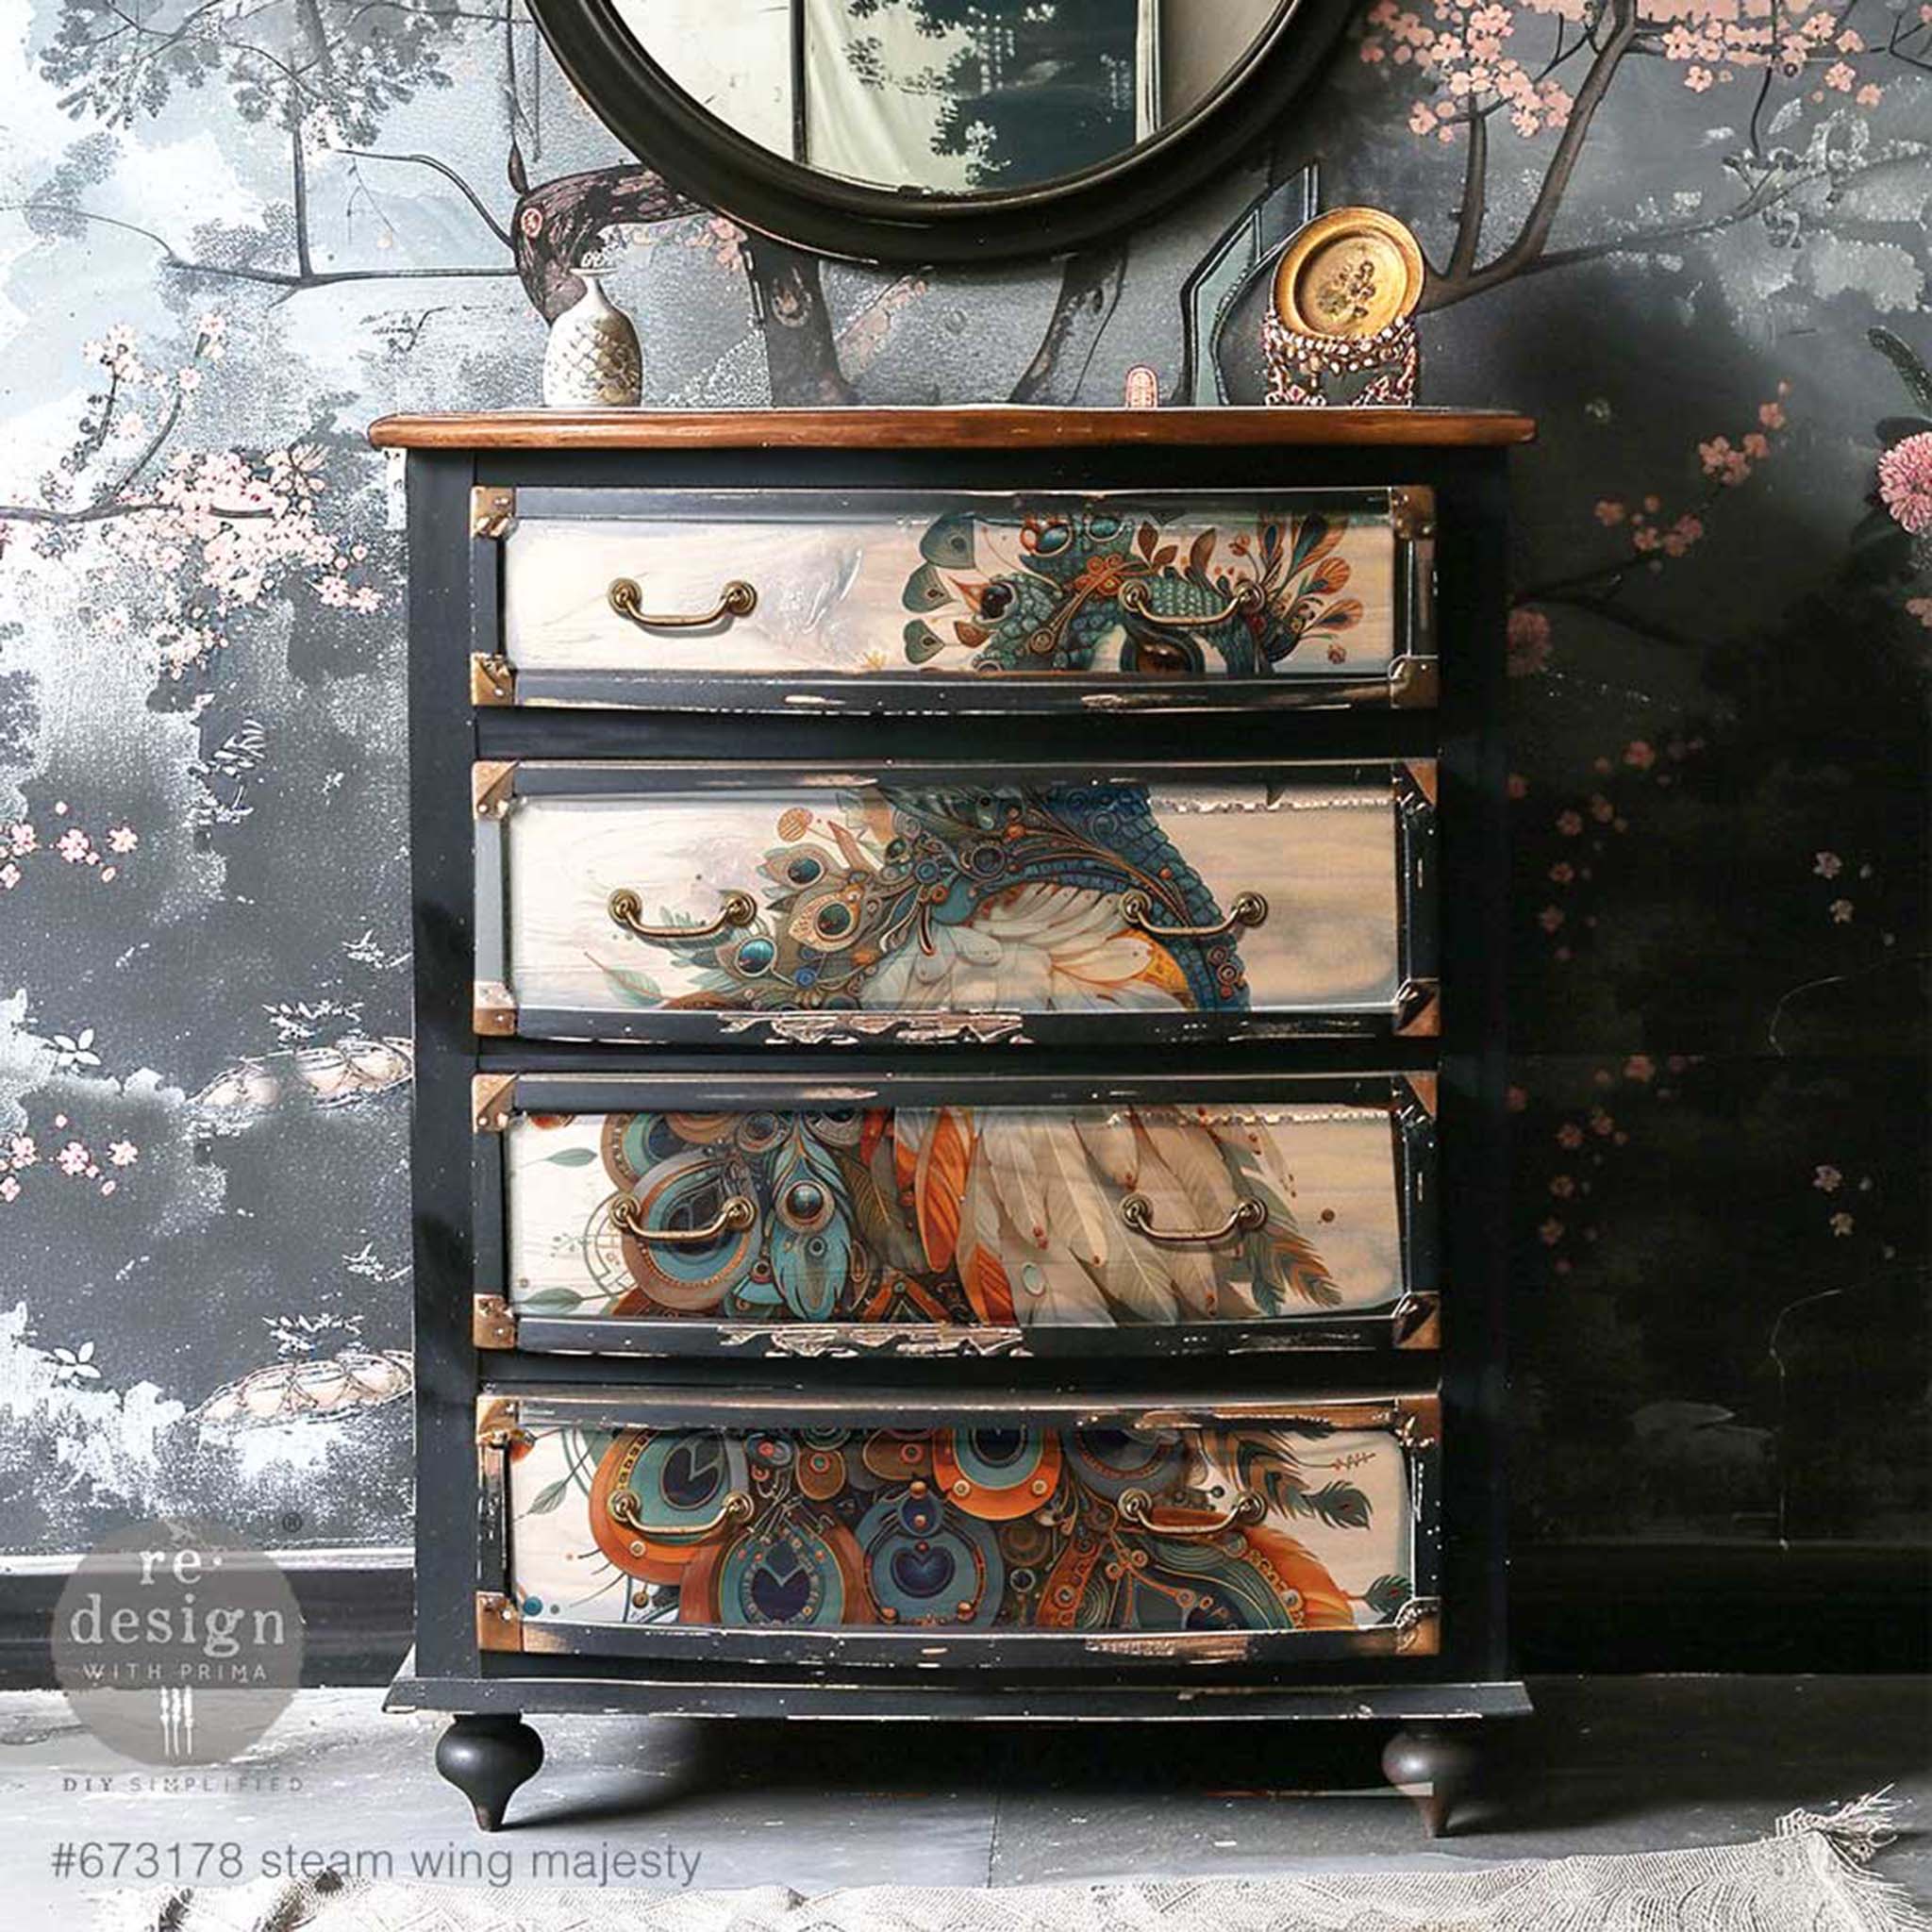 A vintage 4-drawer dresser is painted black and features ReDesign with Prima's Steam Wing Majesty A1 fiber paper on its drawers.